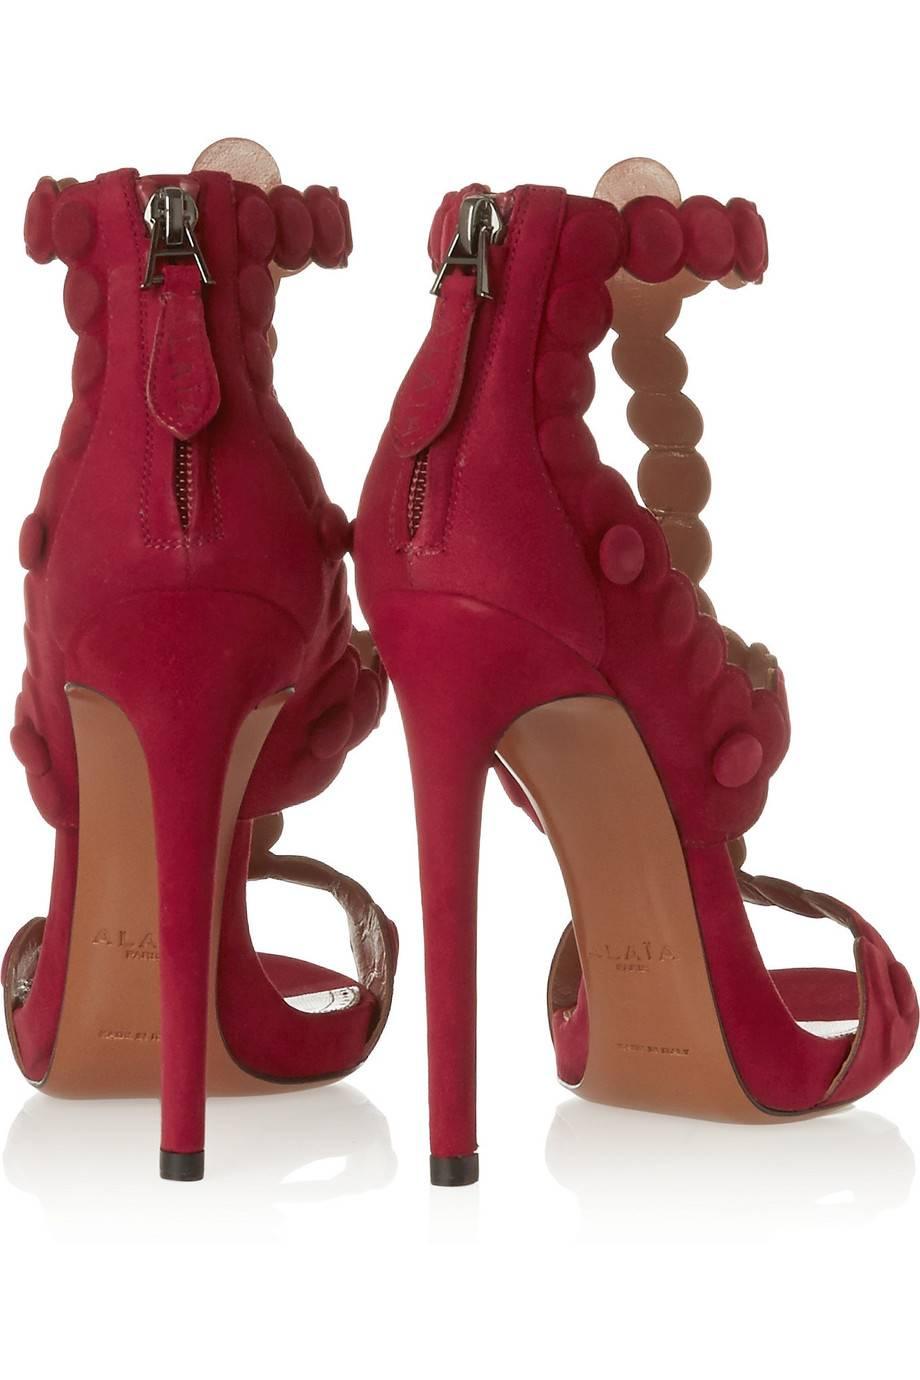 Women's Alaia NEW & SOLD OUT Red Suede Cage Raised Ball Sandals Heels in Box